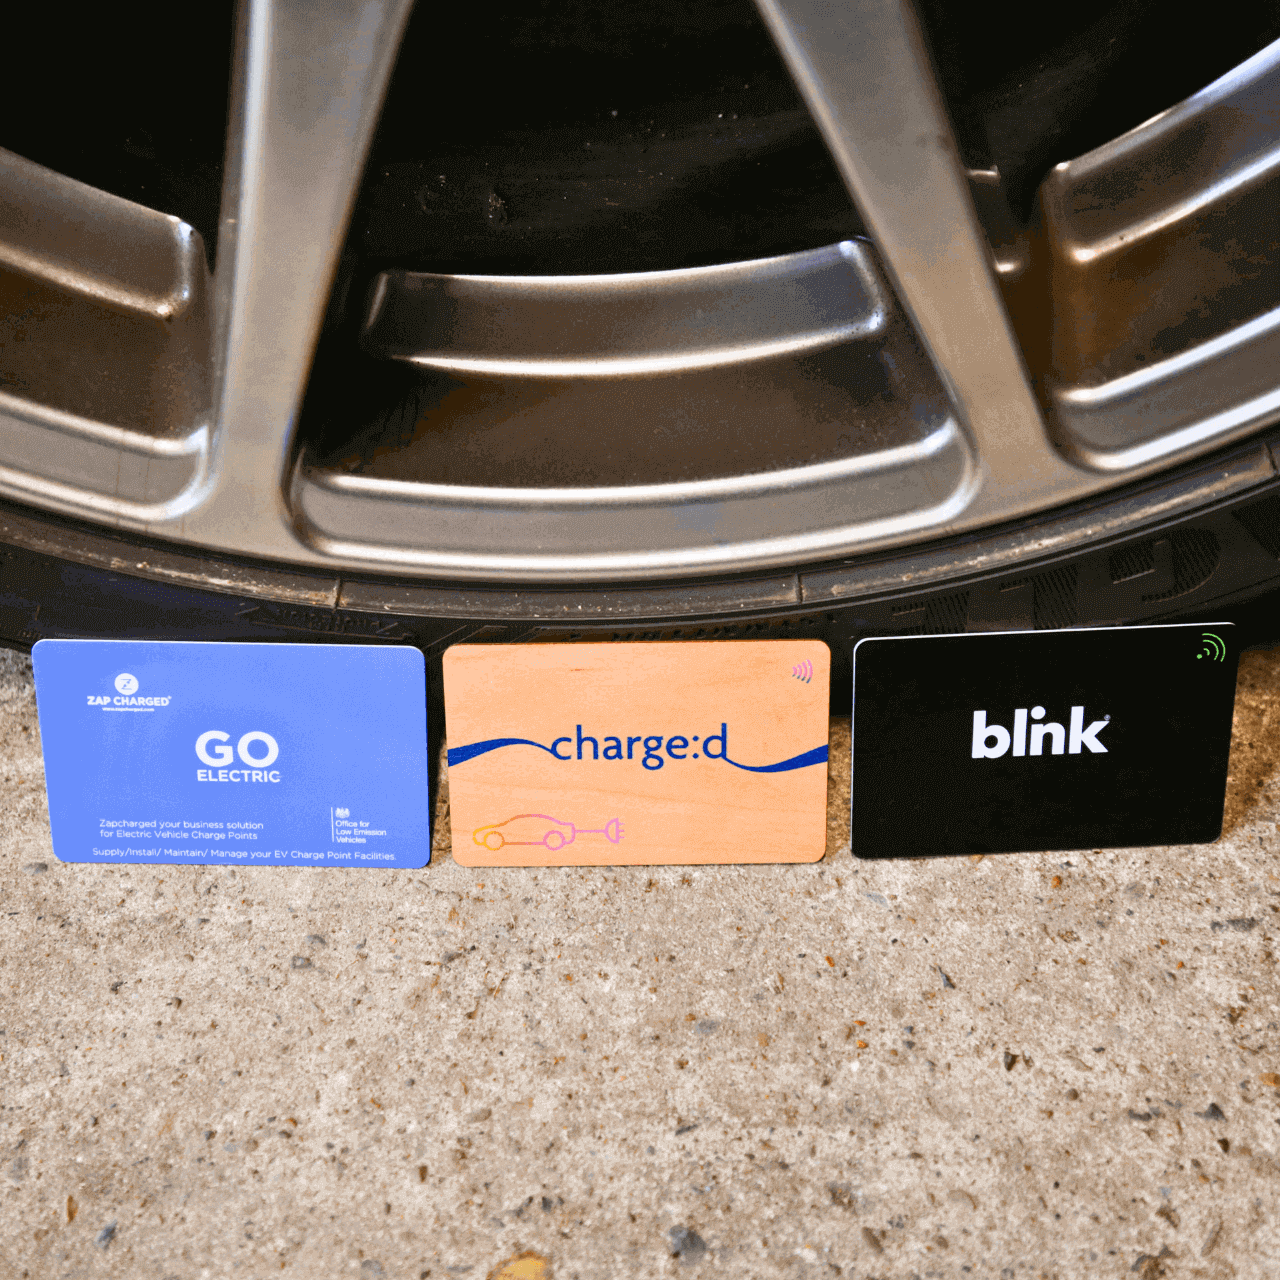 Custom Printed Sustainable EV Charging Cards pictured against a car wheel